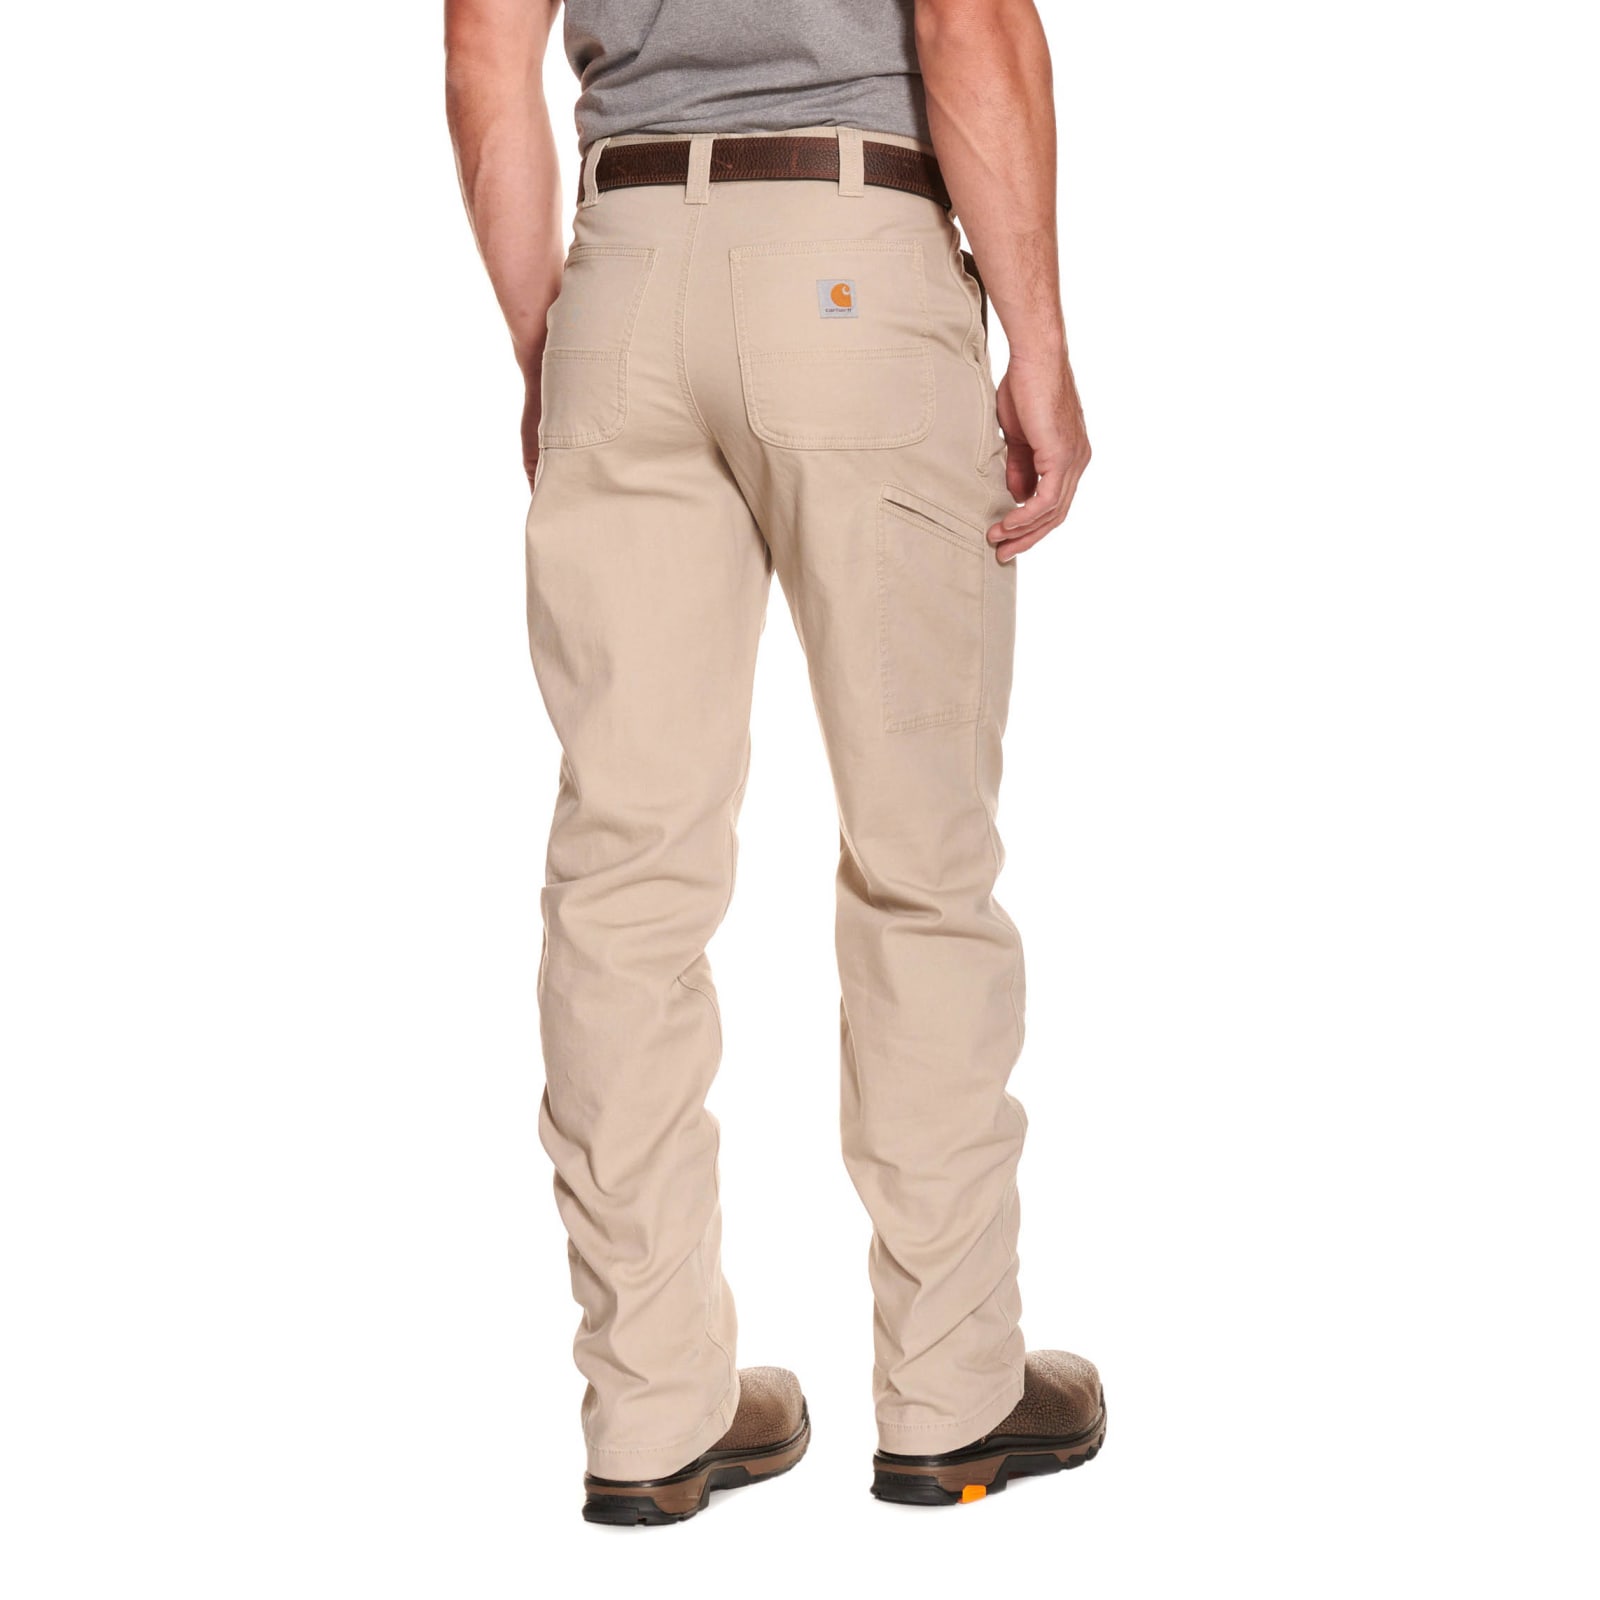 Carhartt Men's Tan Relaxed Fit Straight Leg Flex Stretch Canvas Work Pants available at Cavenders